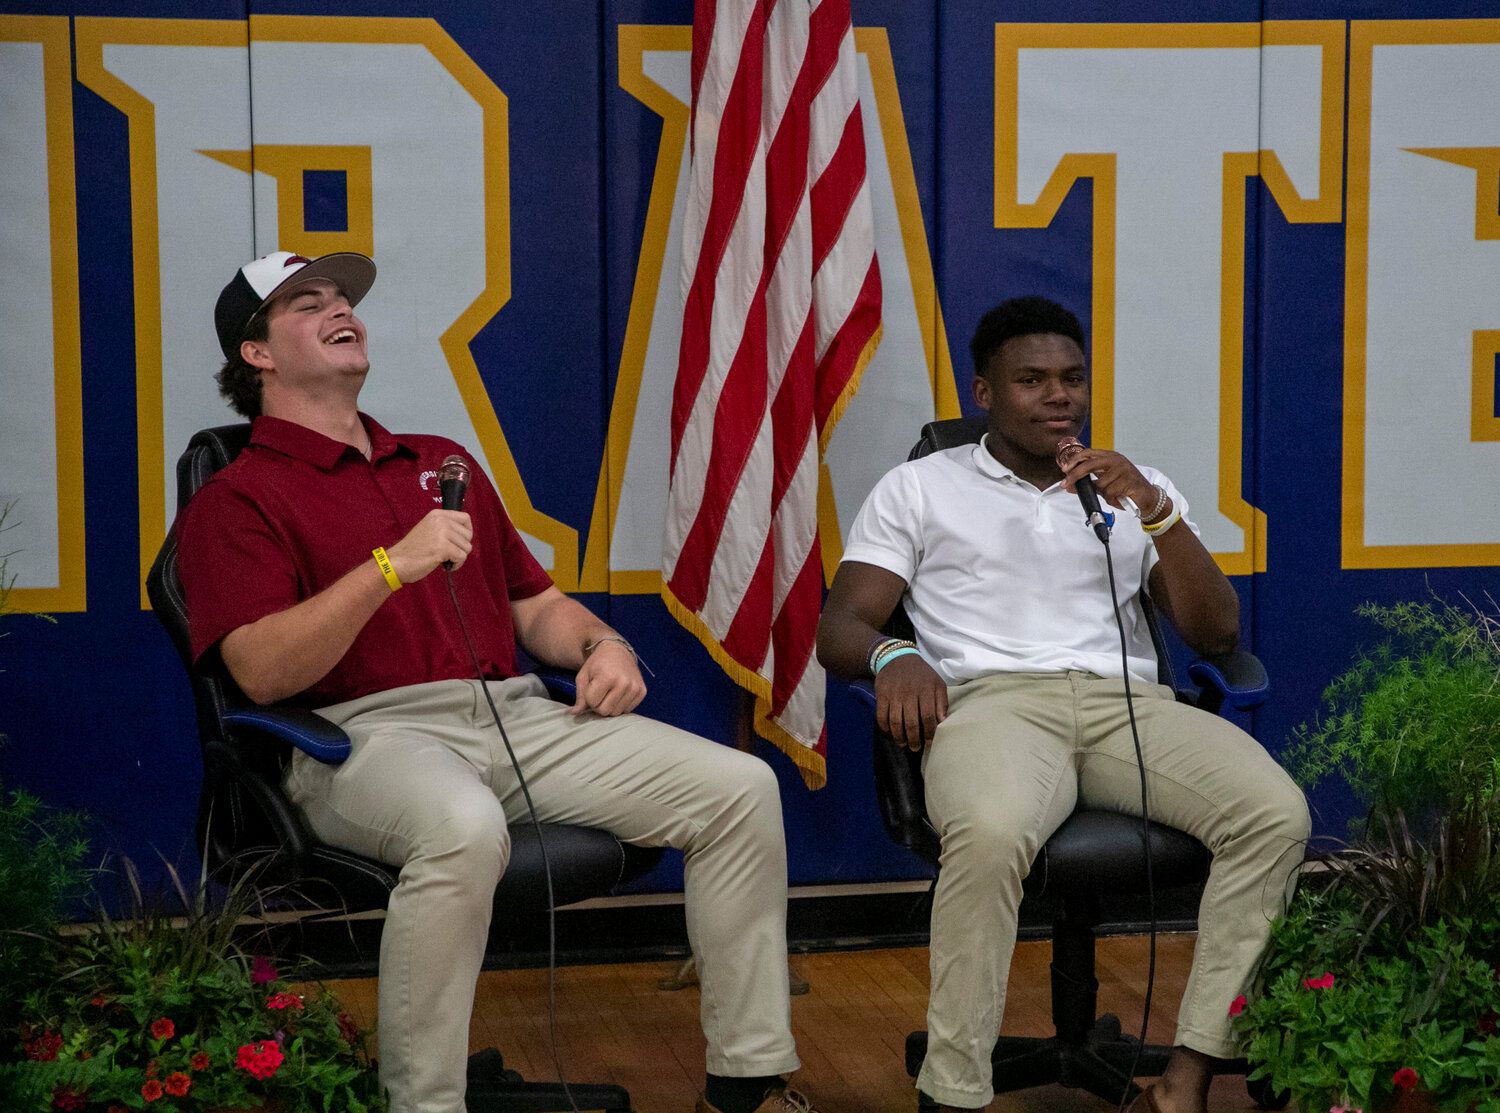 Jacob Conway laughs during his interview with Preston Godfrey on Pirate Nation Live following the signing ceremony in the gymnasium Monday, April 17. Conway signed the commitment he made to the Mobile baseball squad last fall.